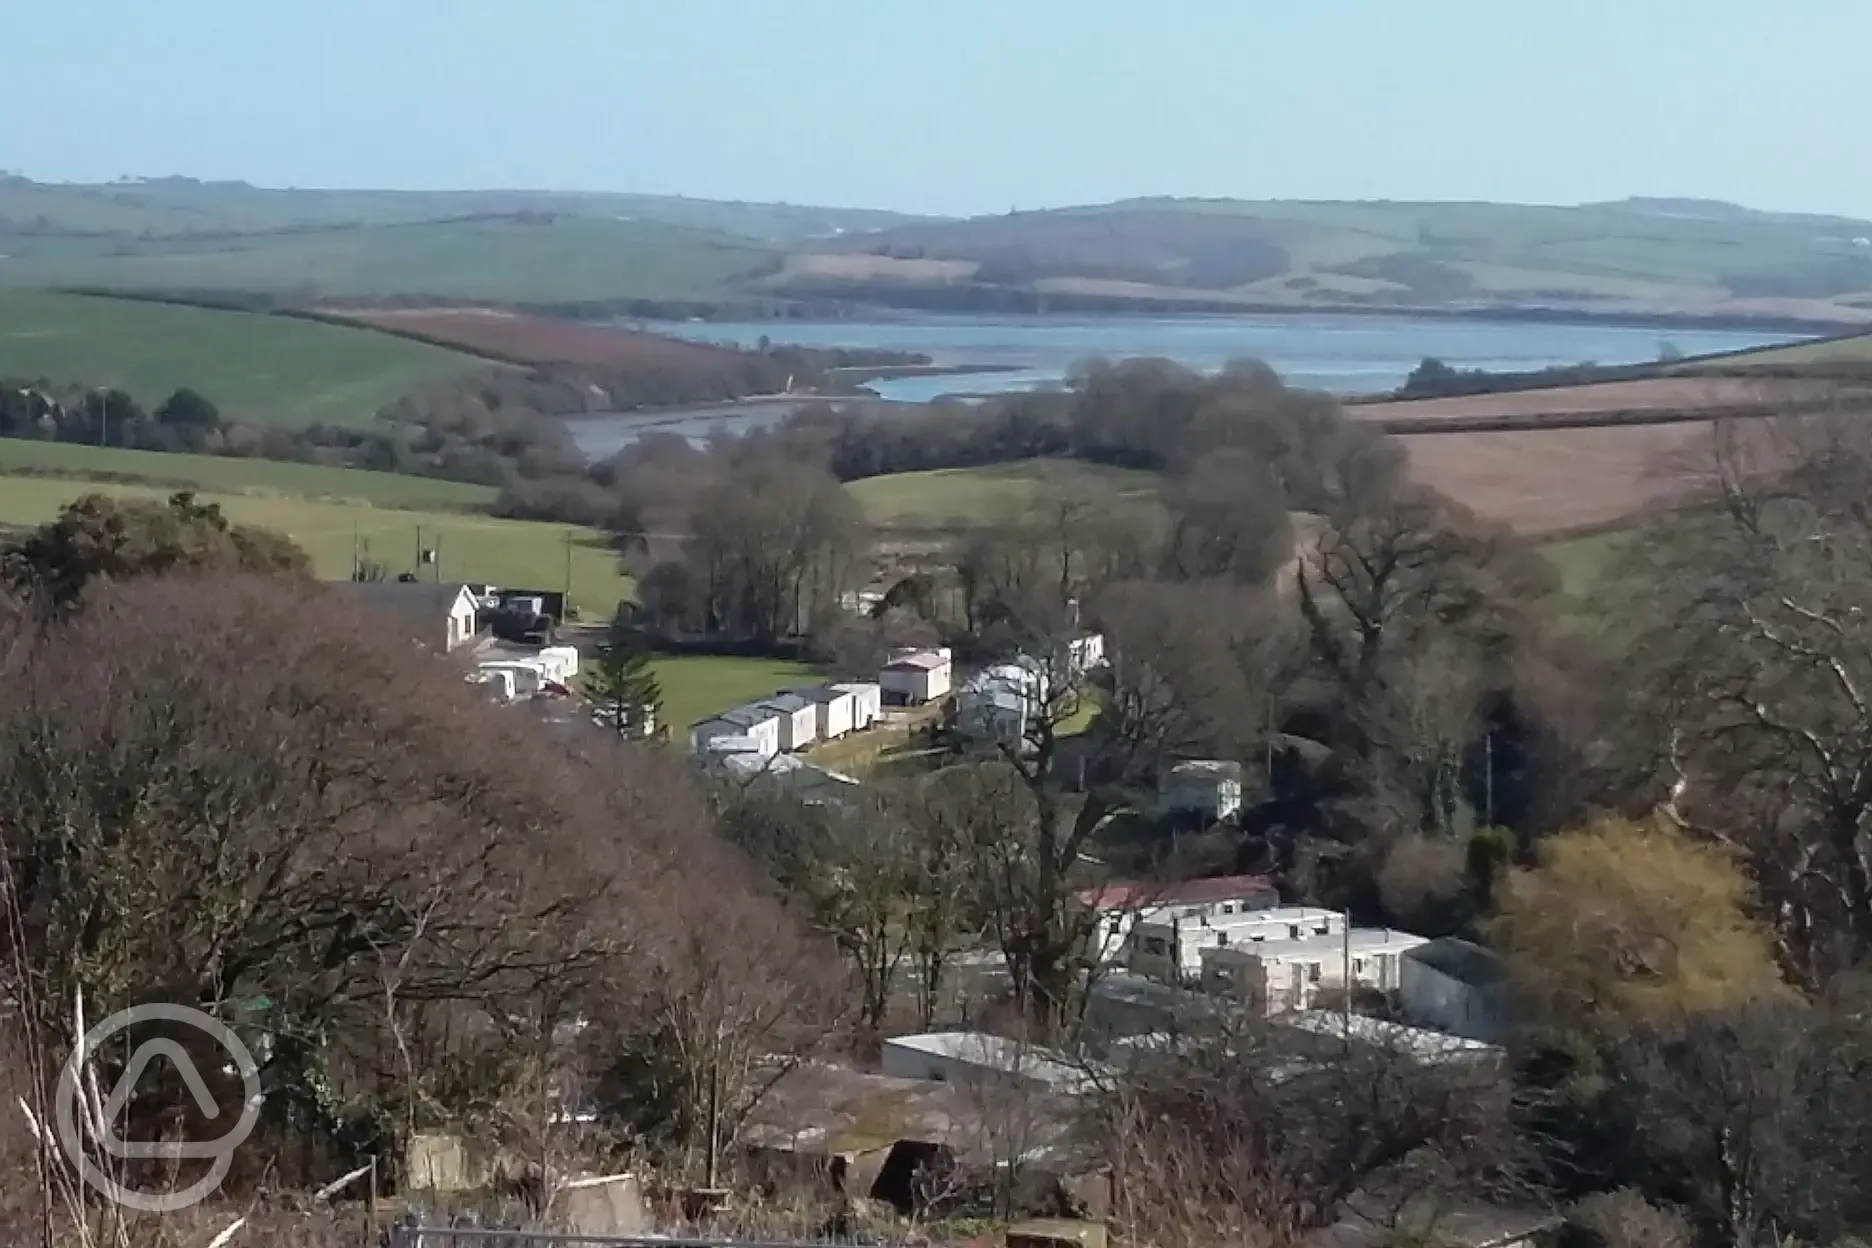 View looking over the site with the estuary at the end of the valley